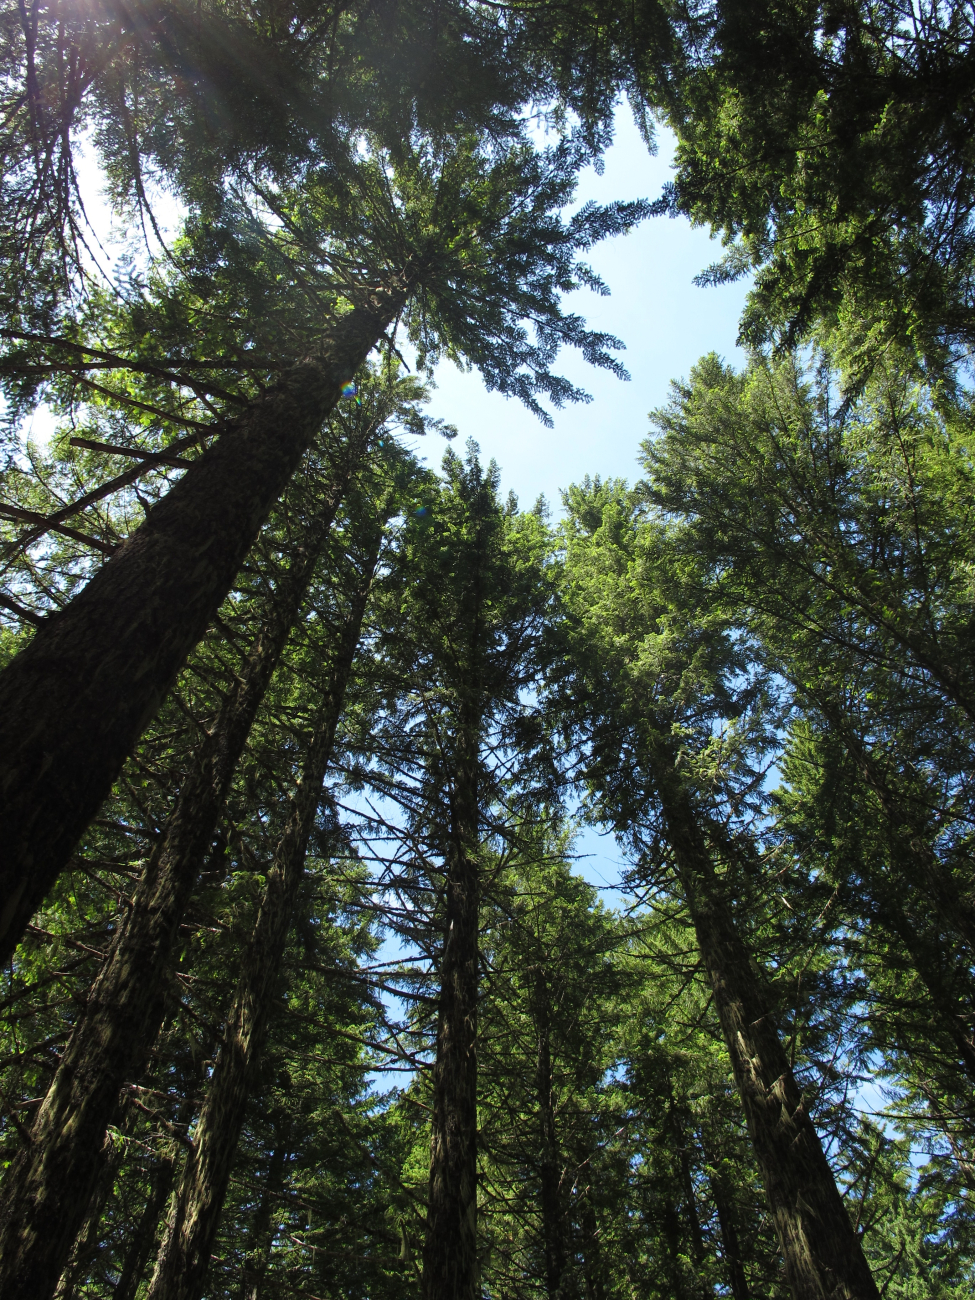 The glorious Douglas fir forest on the west side of the Cascade Mountains